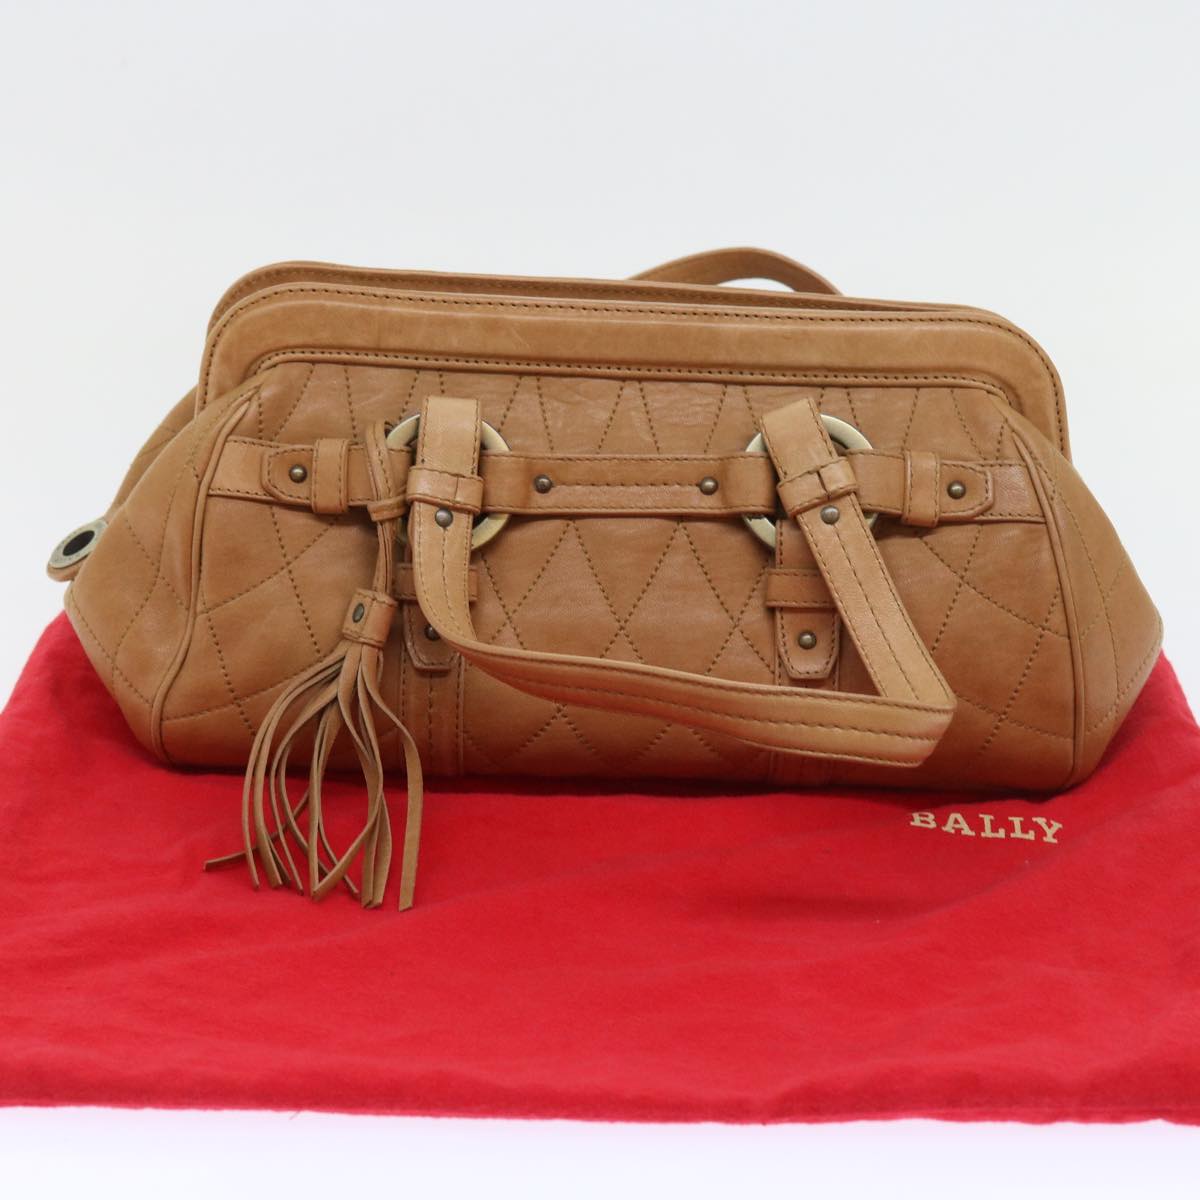 BALLY Shoulder Bag Leather Brown Auth yb398